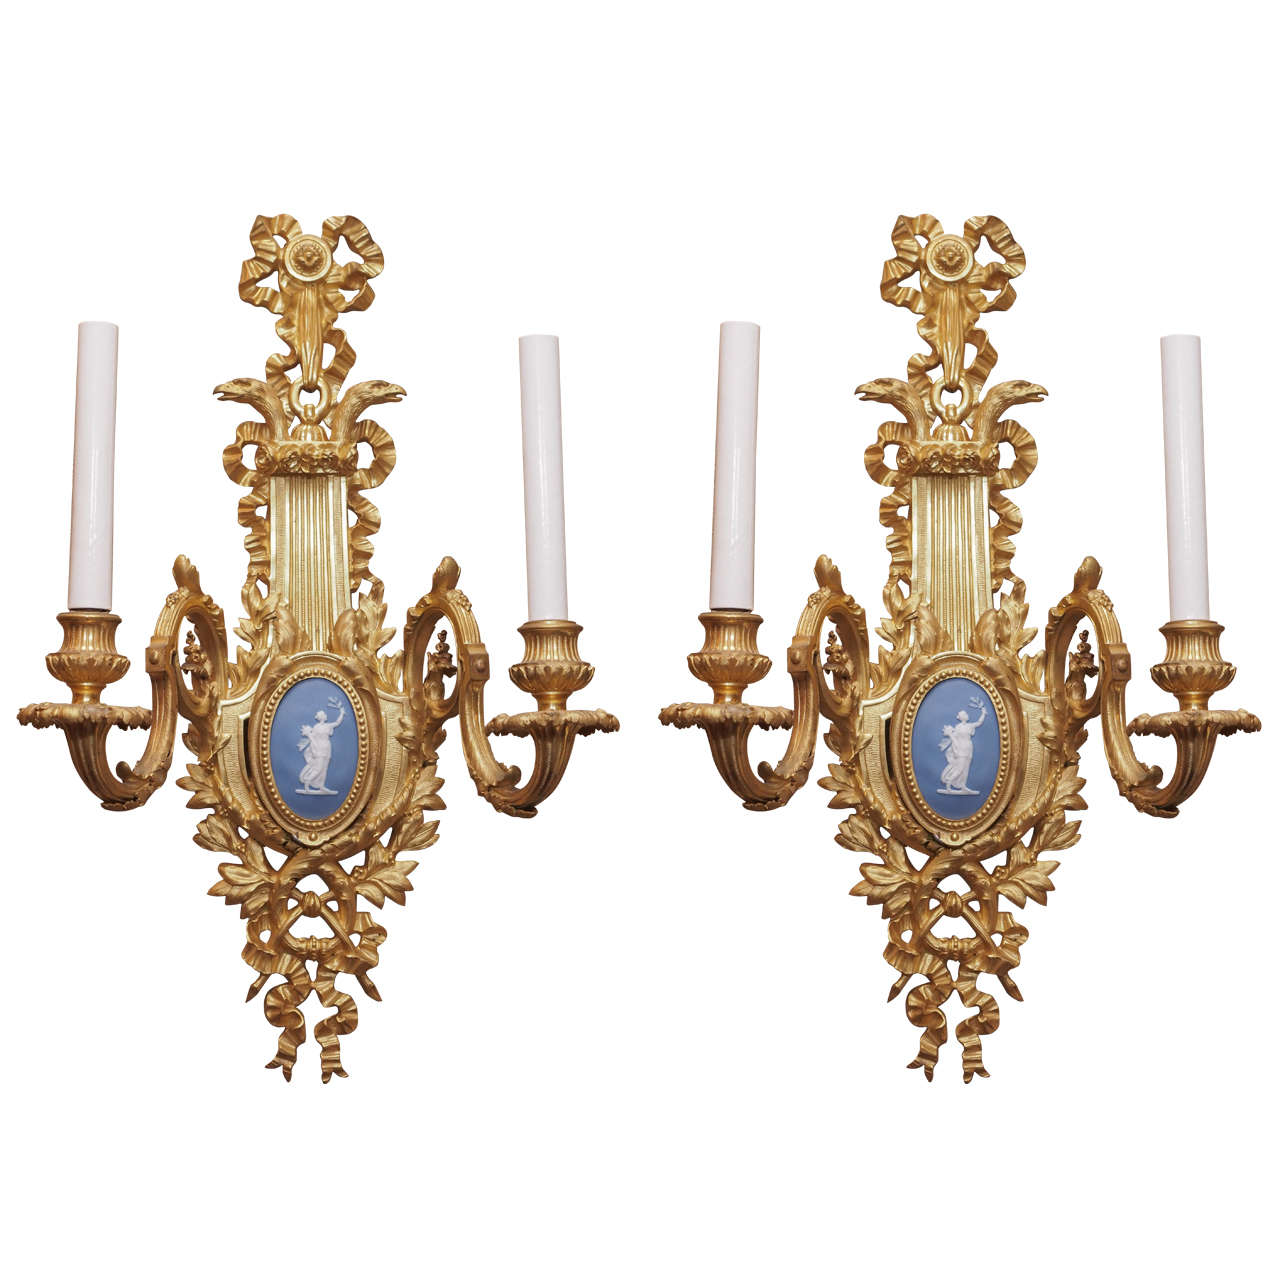 Pair of Antique Ormolu Sconces with Wedgwood Plaques, circa 1890-1900